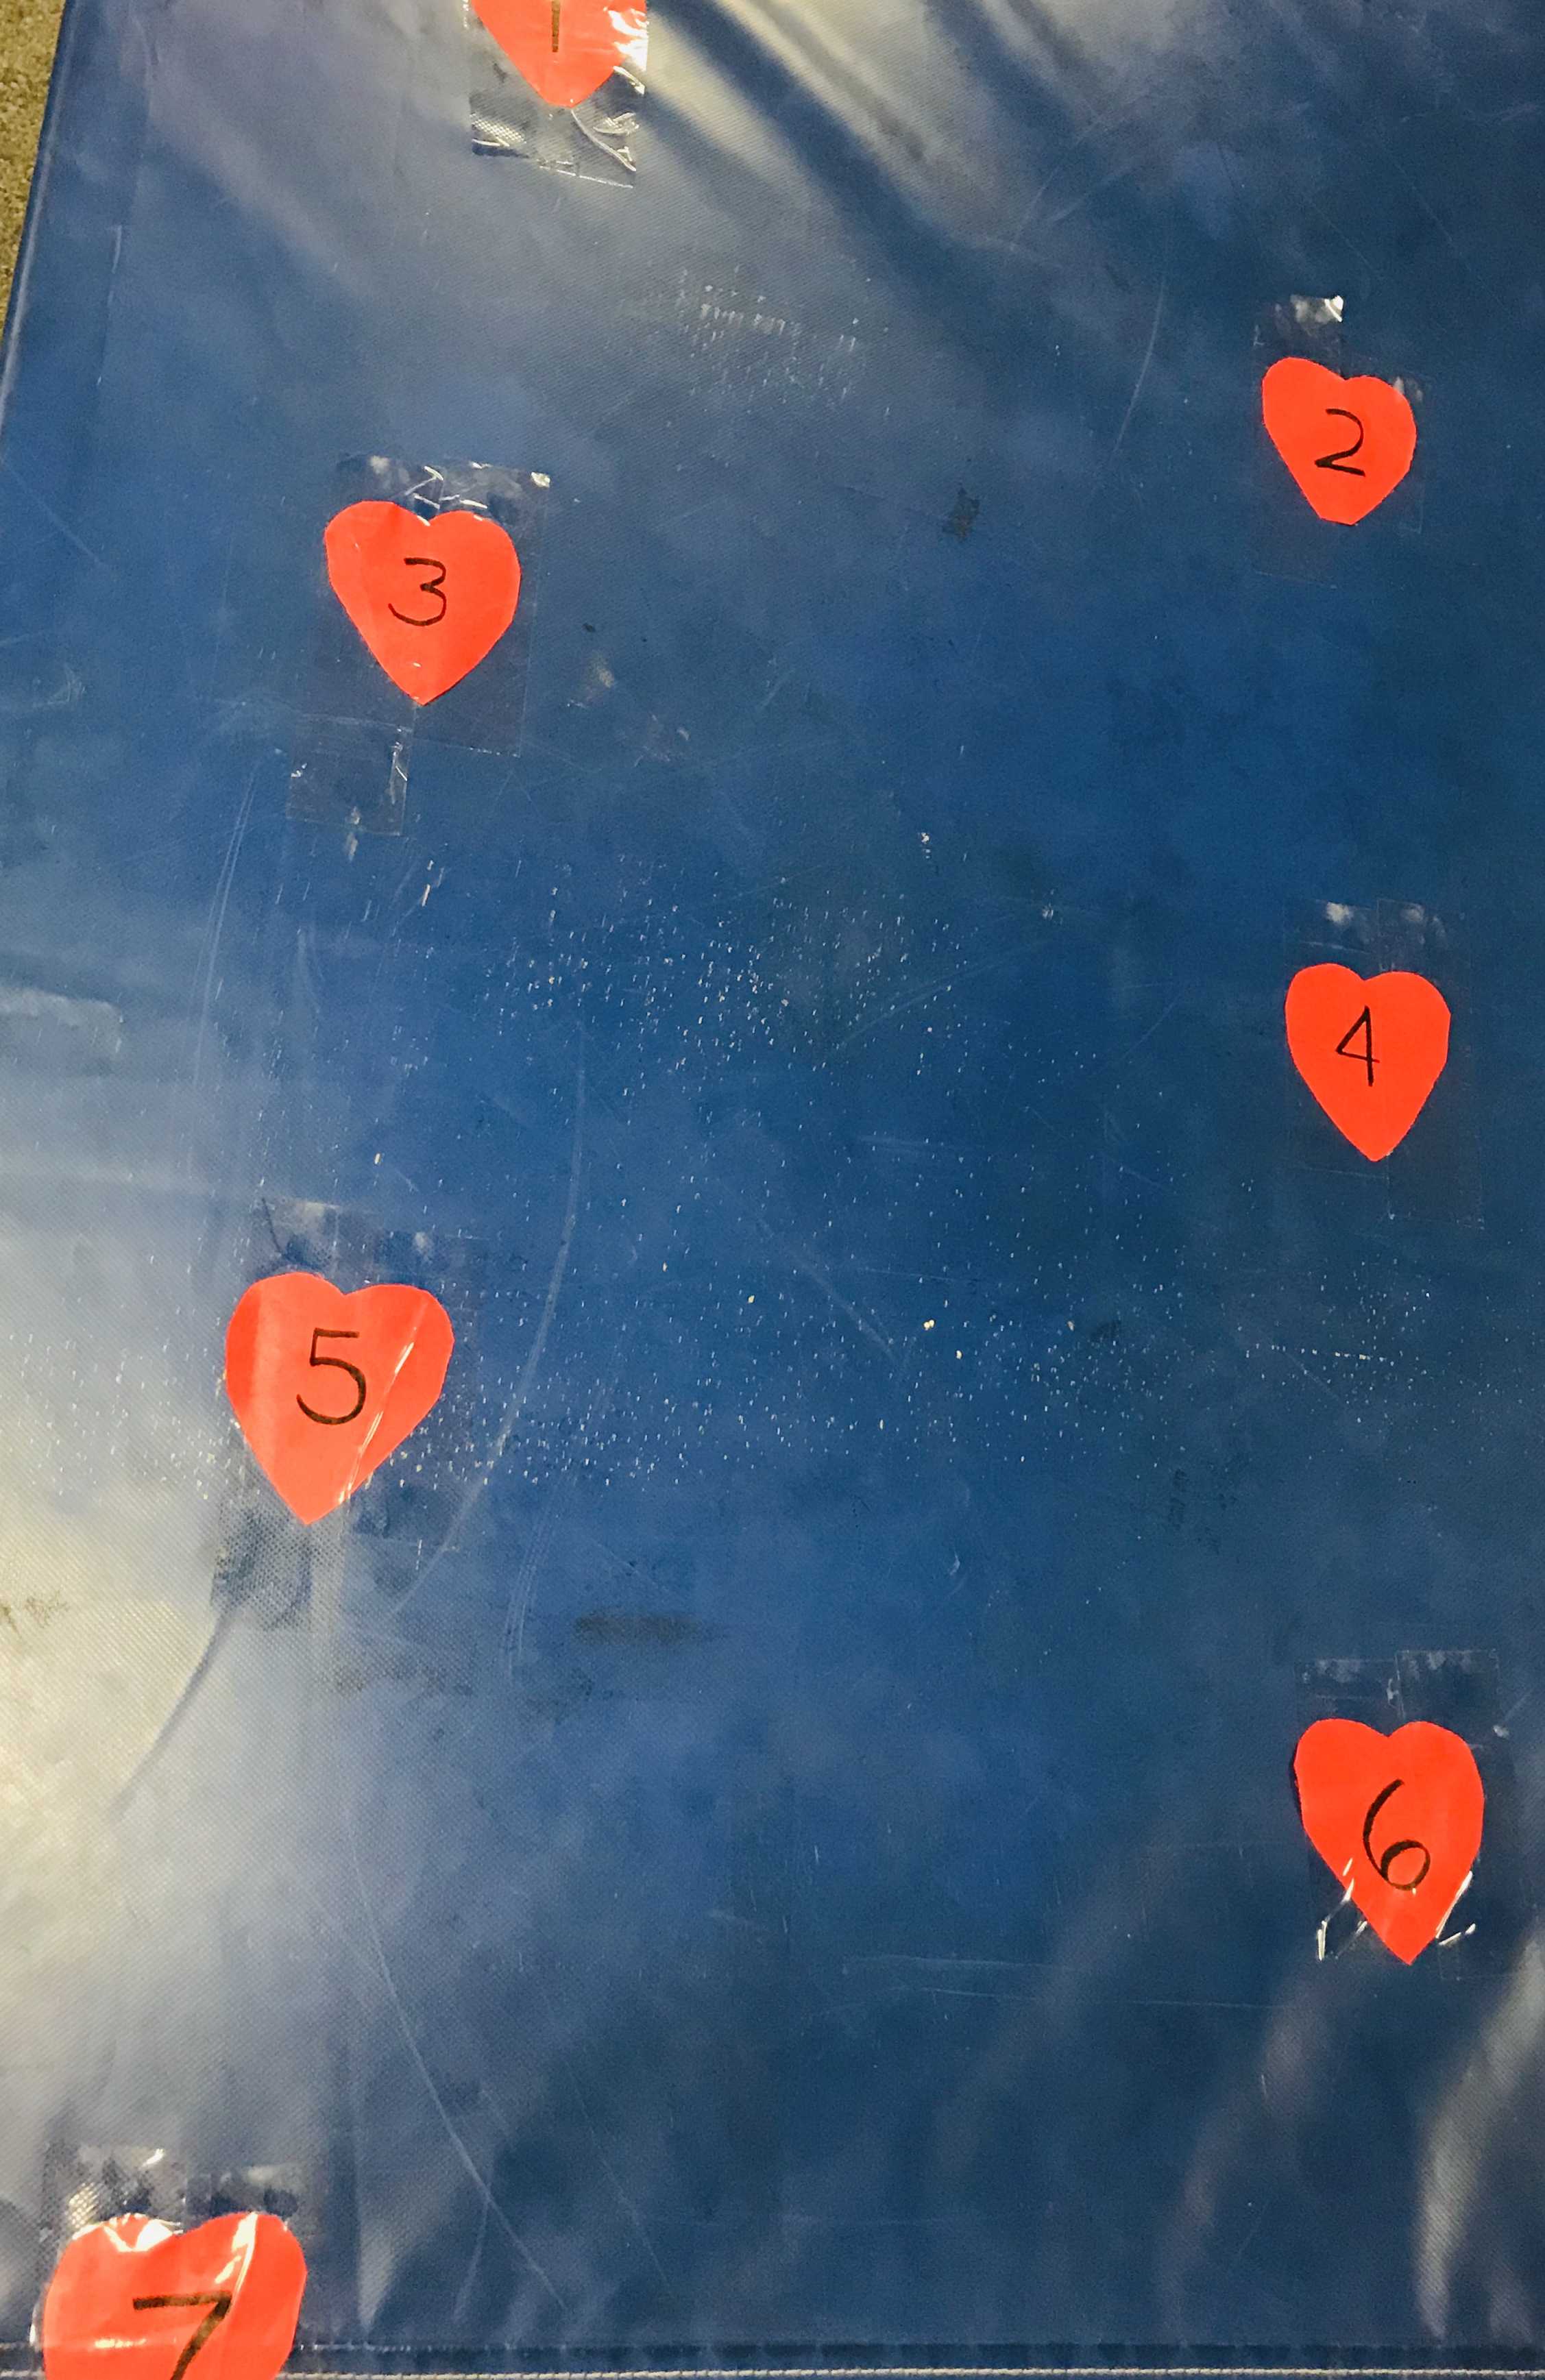 Laminated hearts with numbers